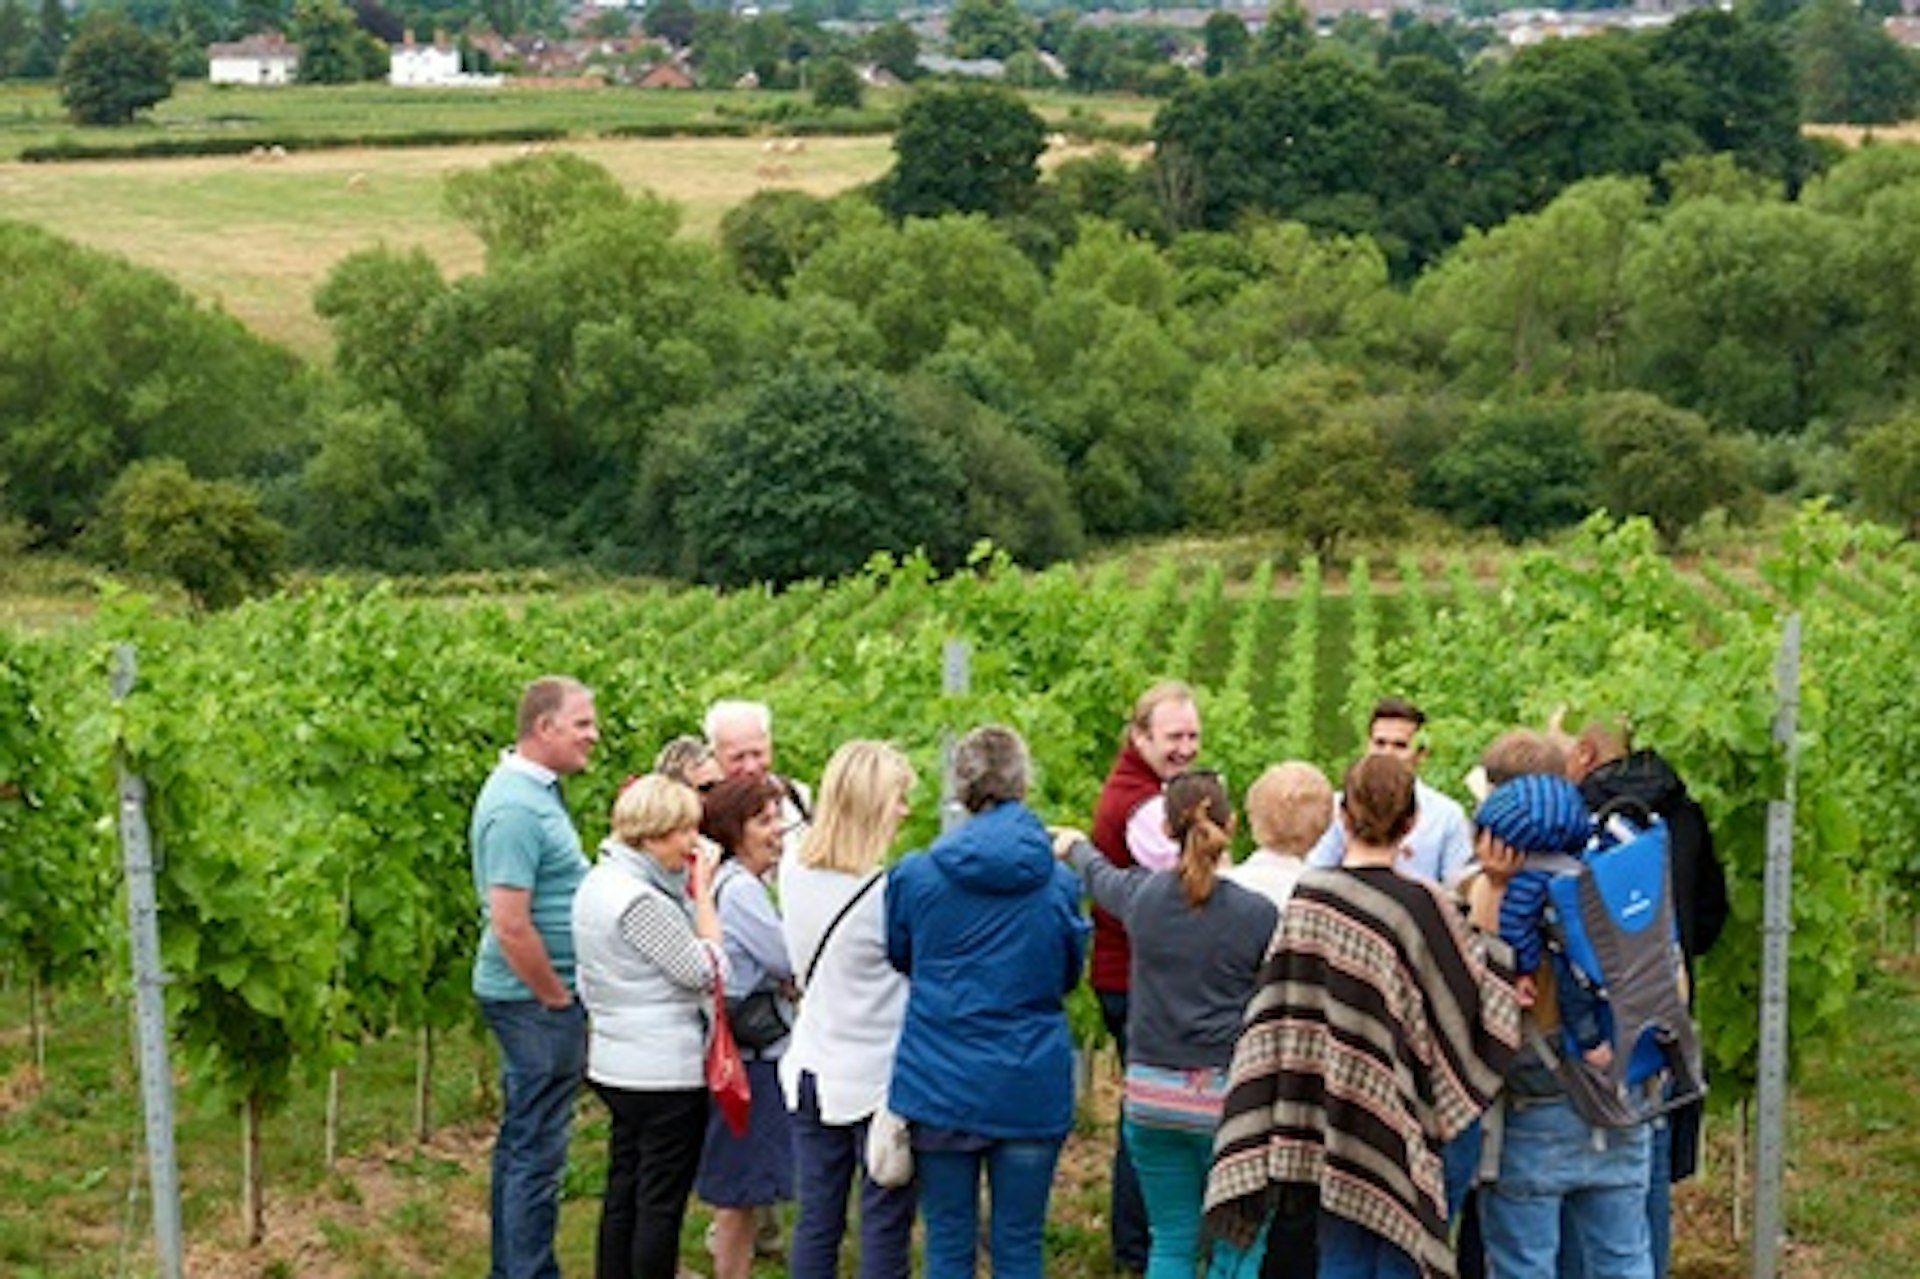 Tour and Tasting with Glass of Sparkling Wine for Two at Hencote Vineyard 2